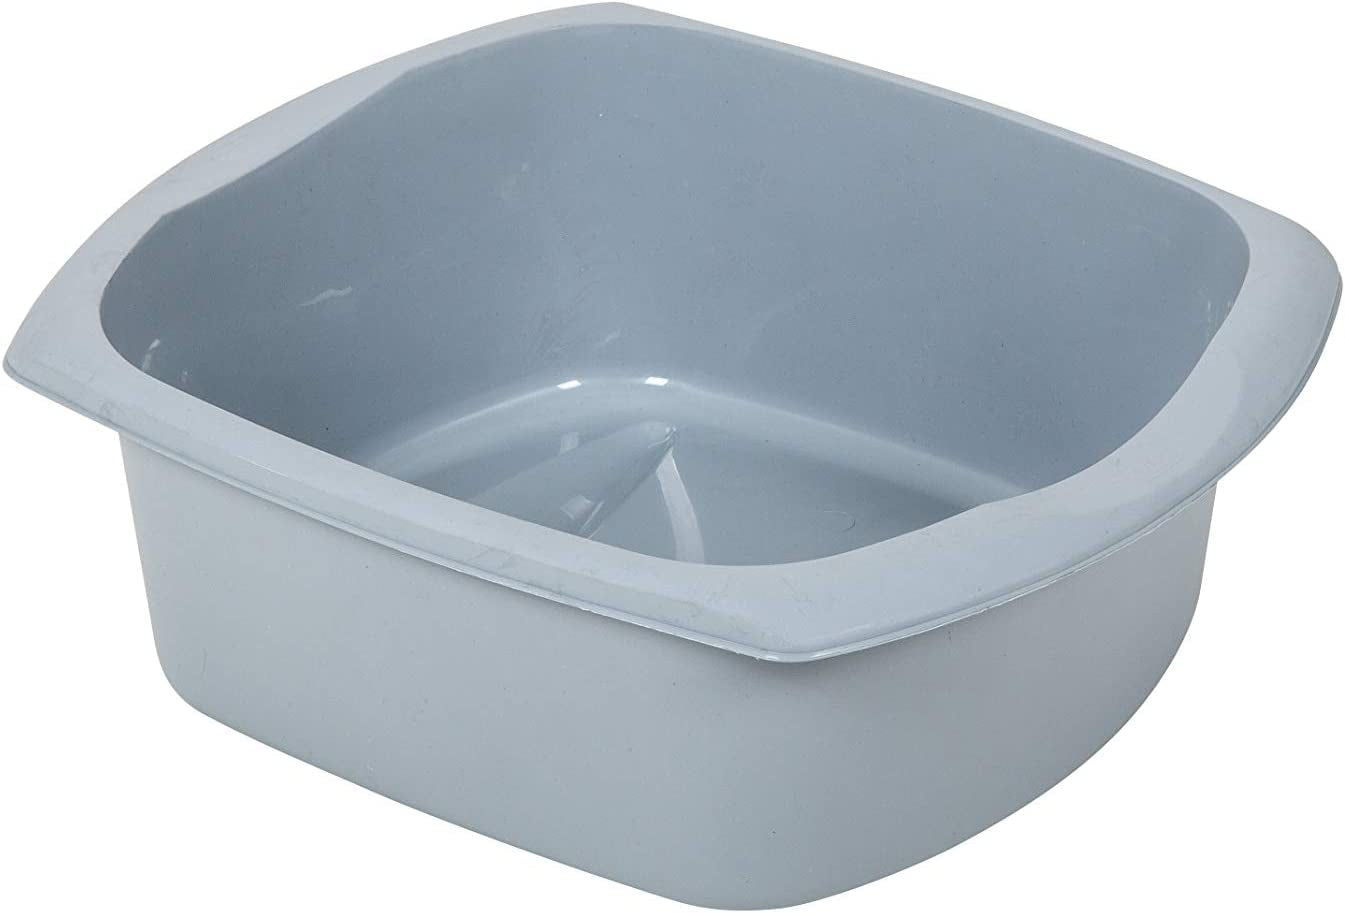 518459 Eco Made from 100% Recycled Plastic Large Rectangular Washing up Bowl, 9.5 Litre, Light Grey